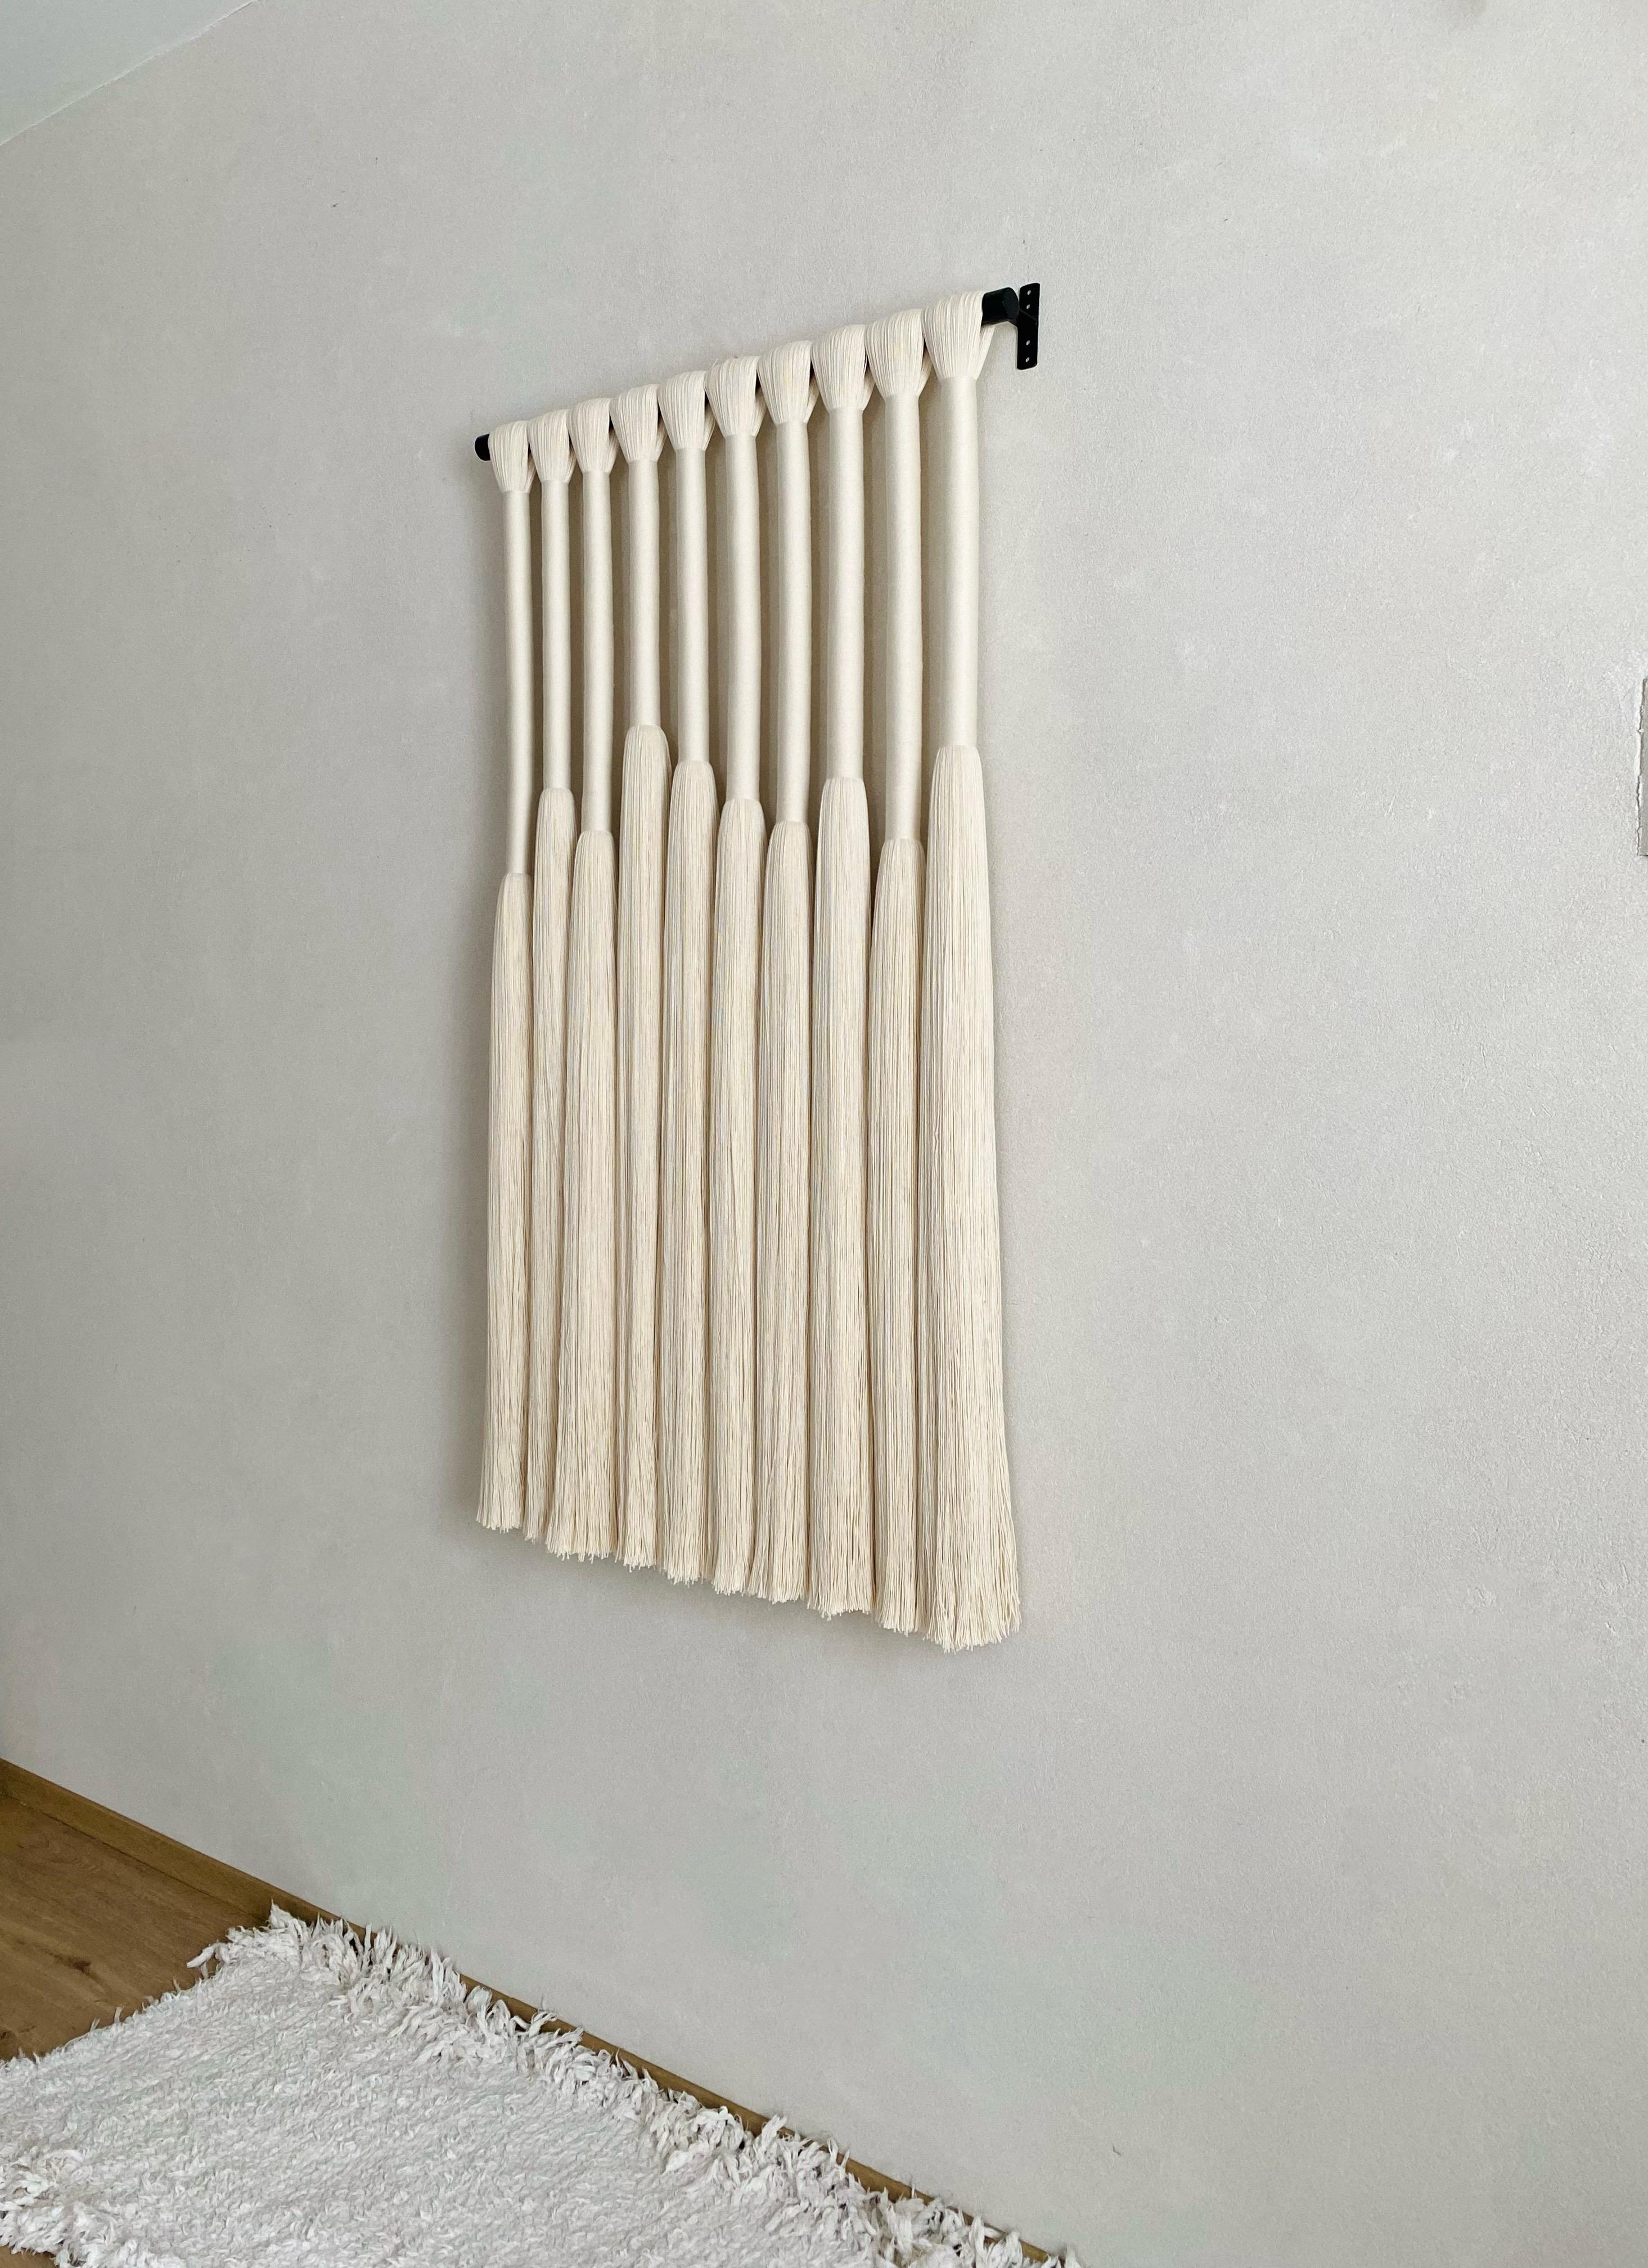 This dramatic wall hanging is an impressive statement piece for almost any room.Custom sizes and others colors available by request.
Each piece is completely made to order and is available to ship 8-9 weeks after ordering. 

Handmade by weavers